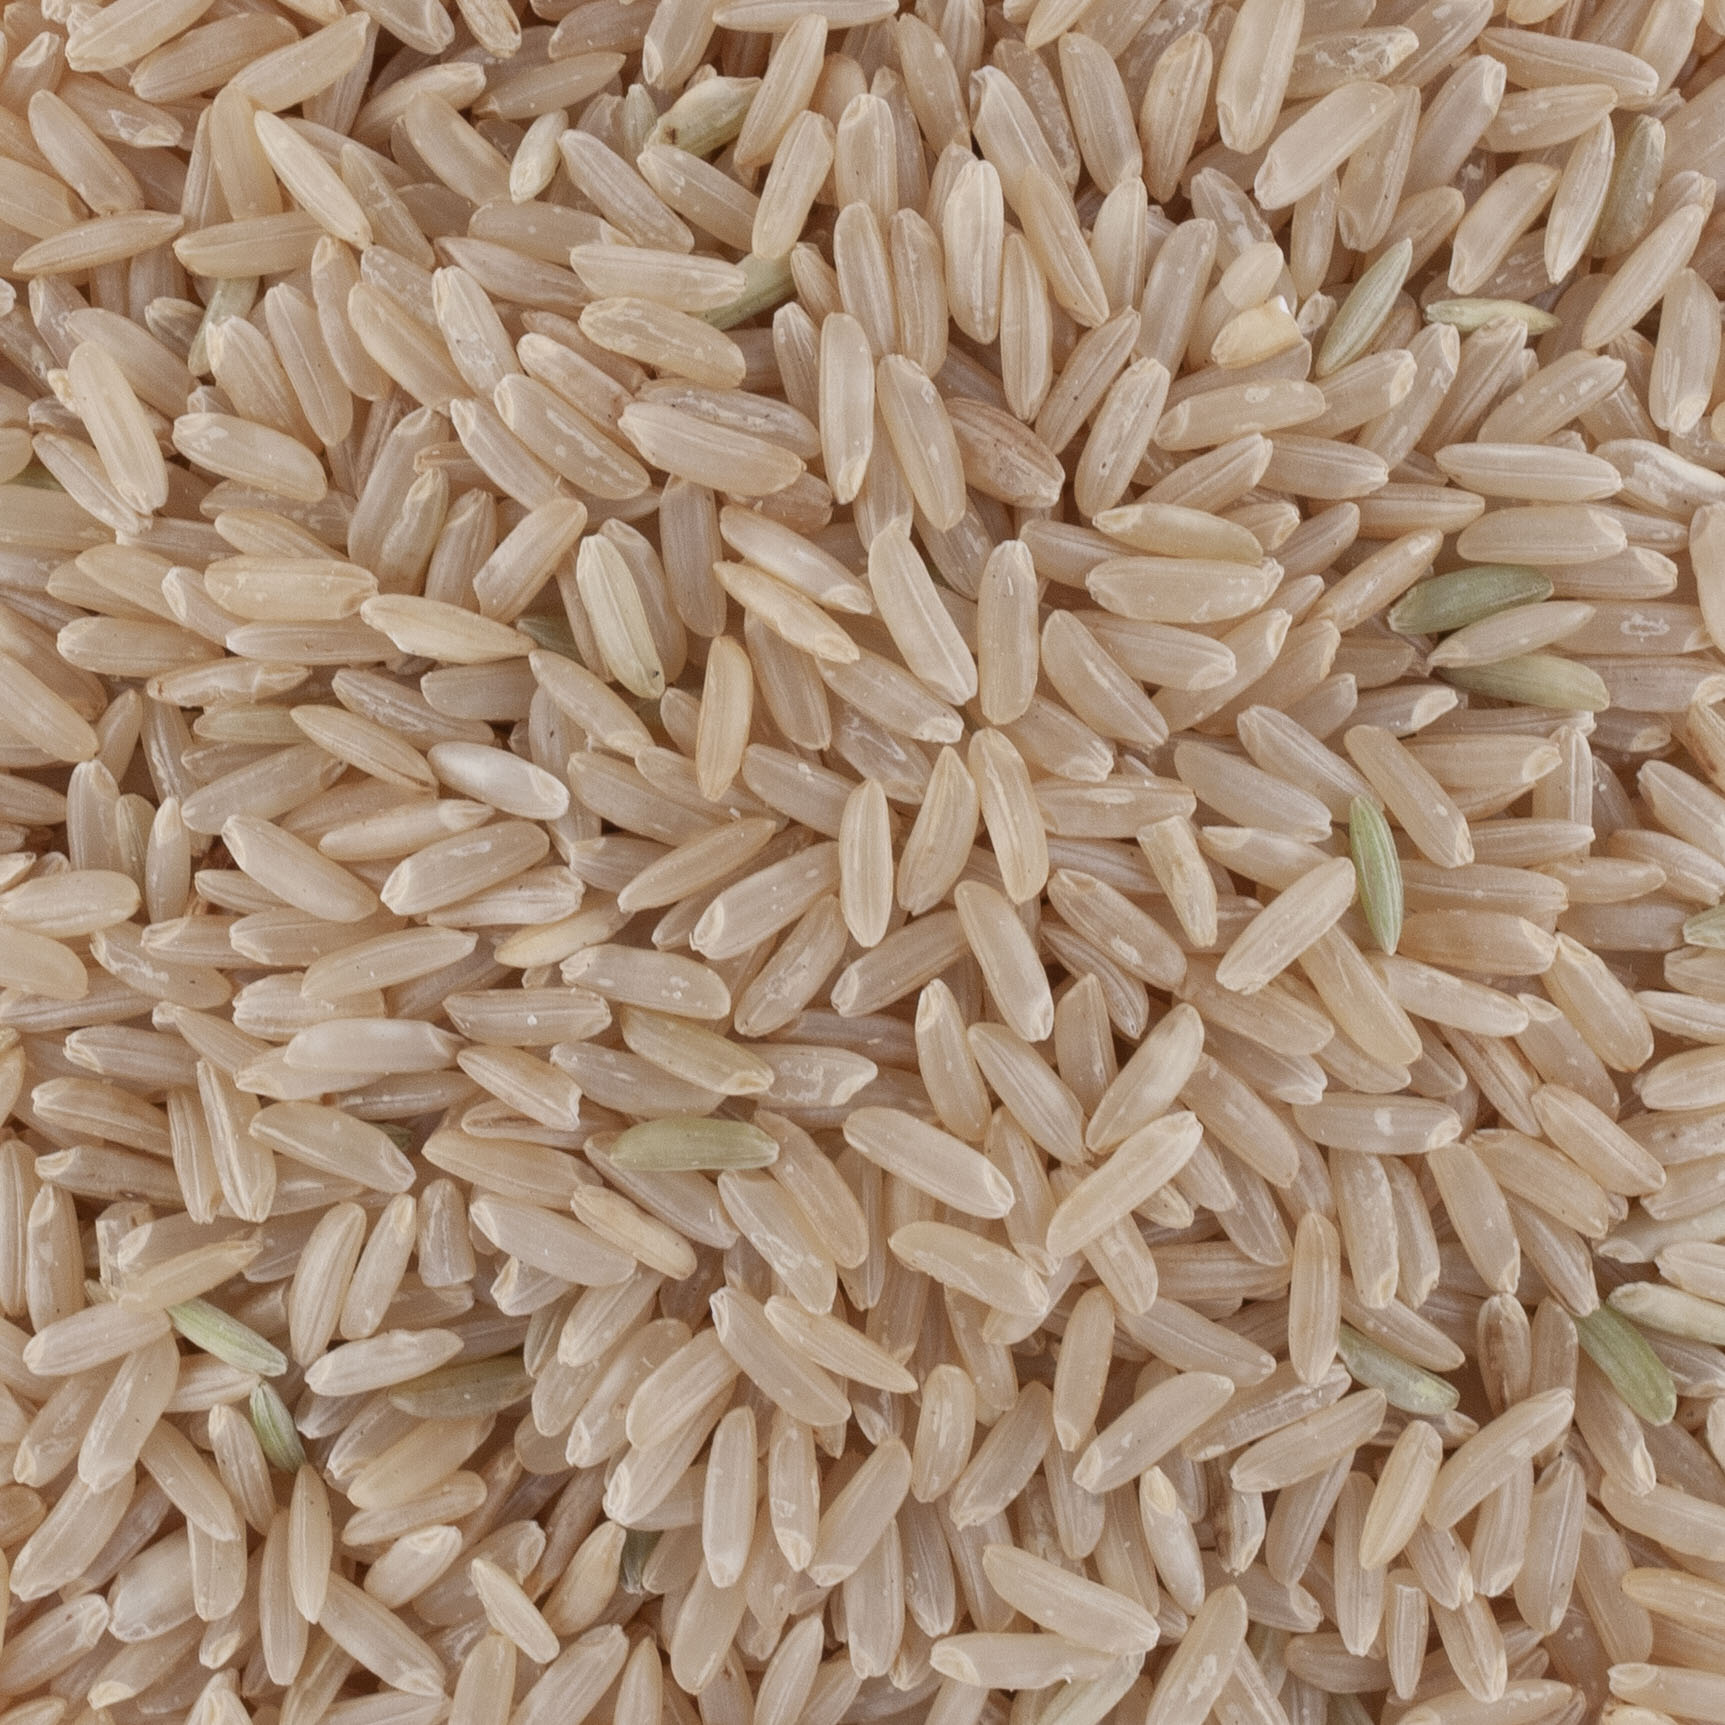 RIZ DE CAMARGUE IGP LONG COMPLET BIO - day by day